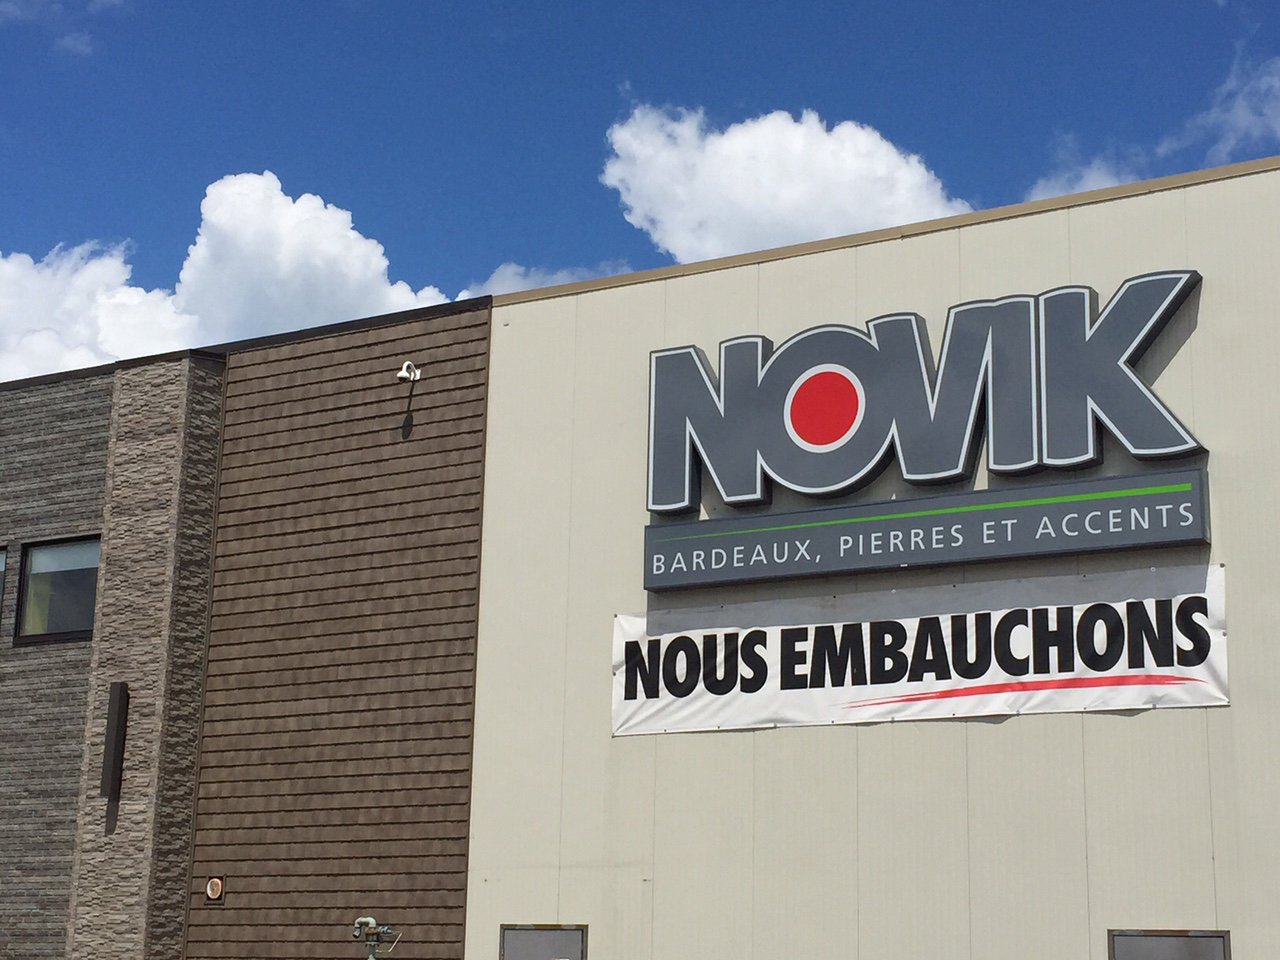 Novik has acquired Exteria Building Products.